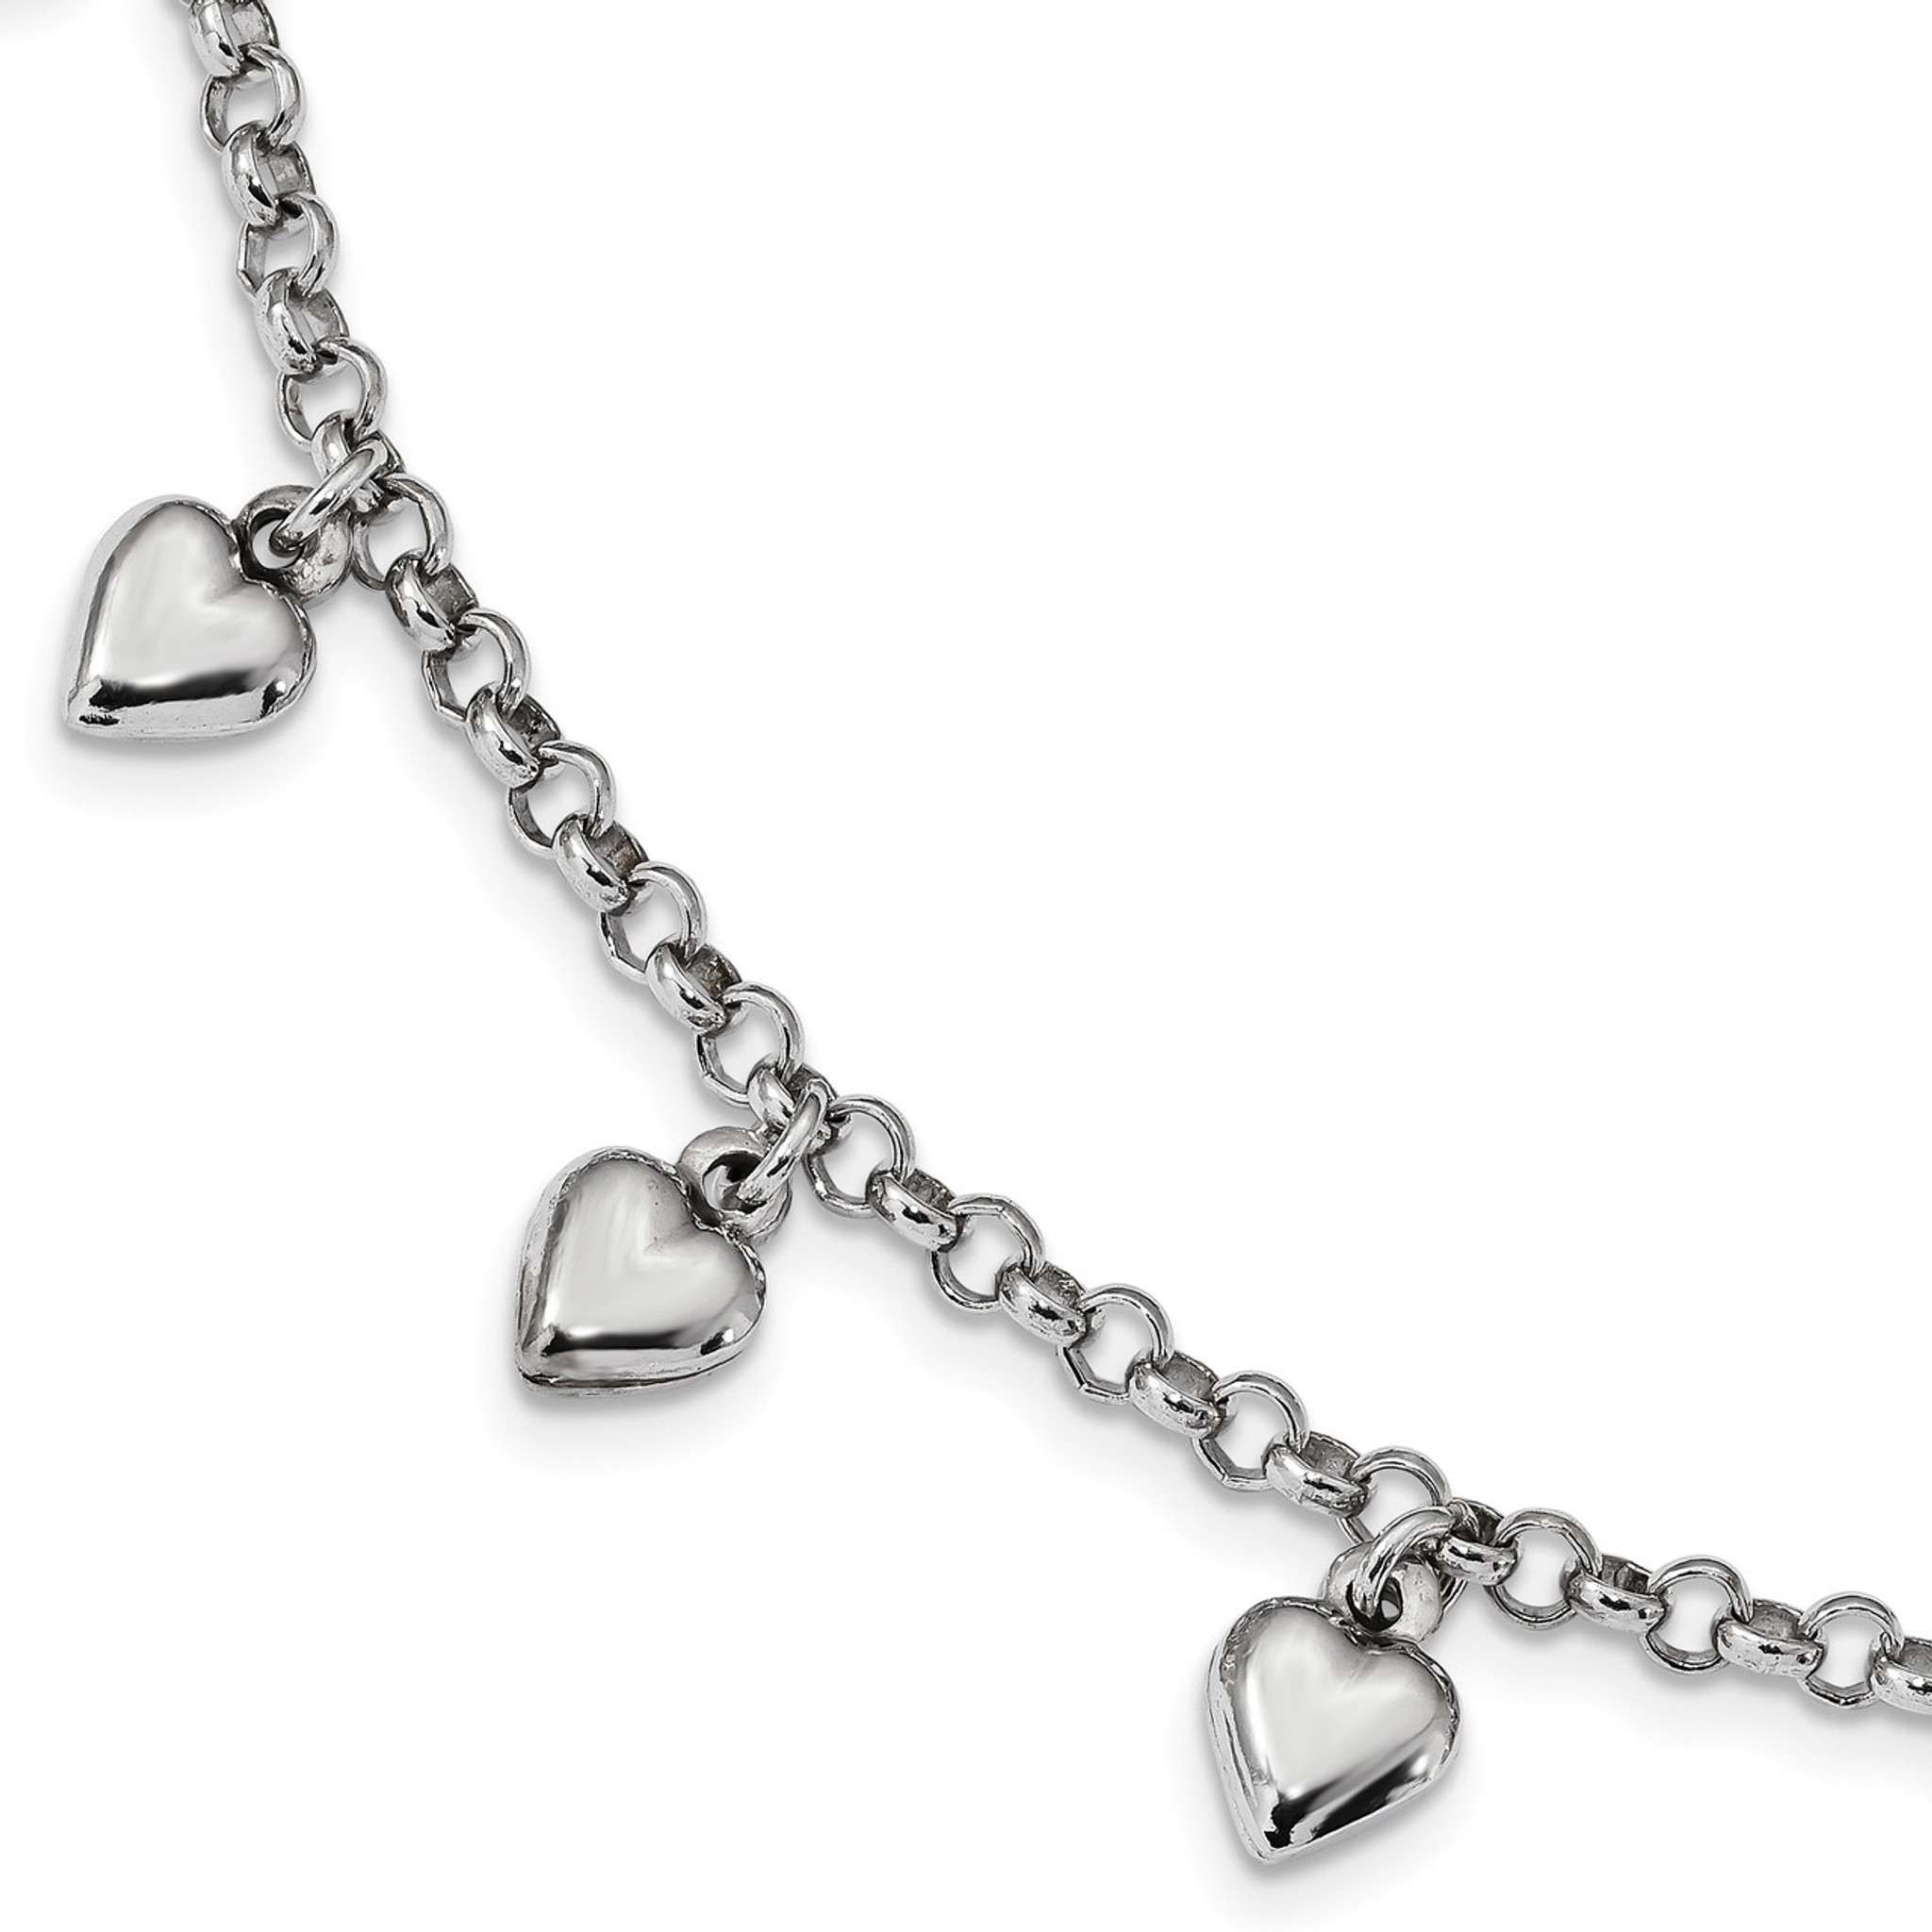 Sterling Silver 3.8 MM Polished Puffed Heart Charm Bracelet 7